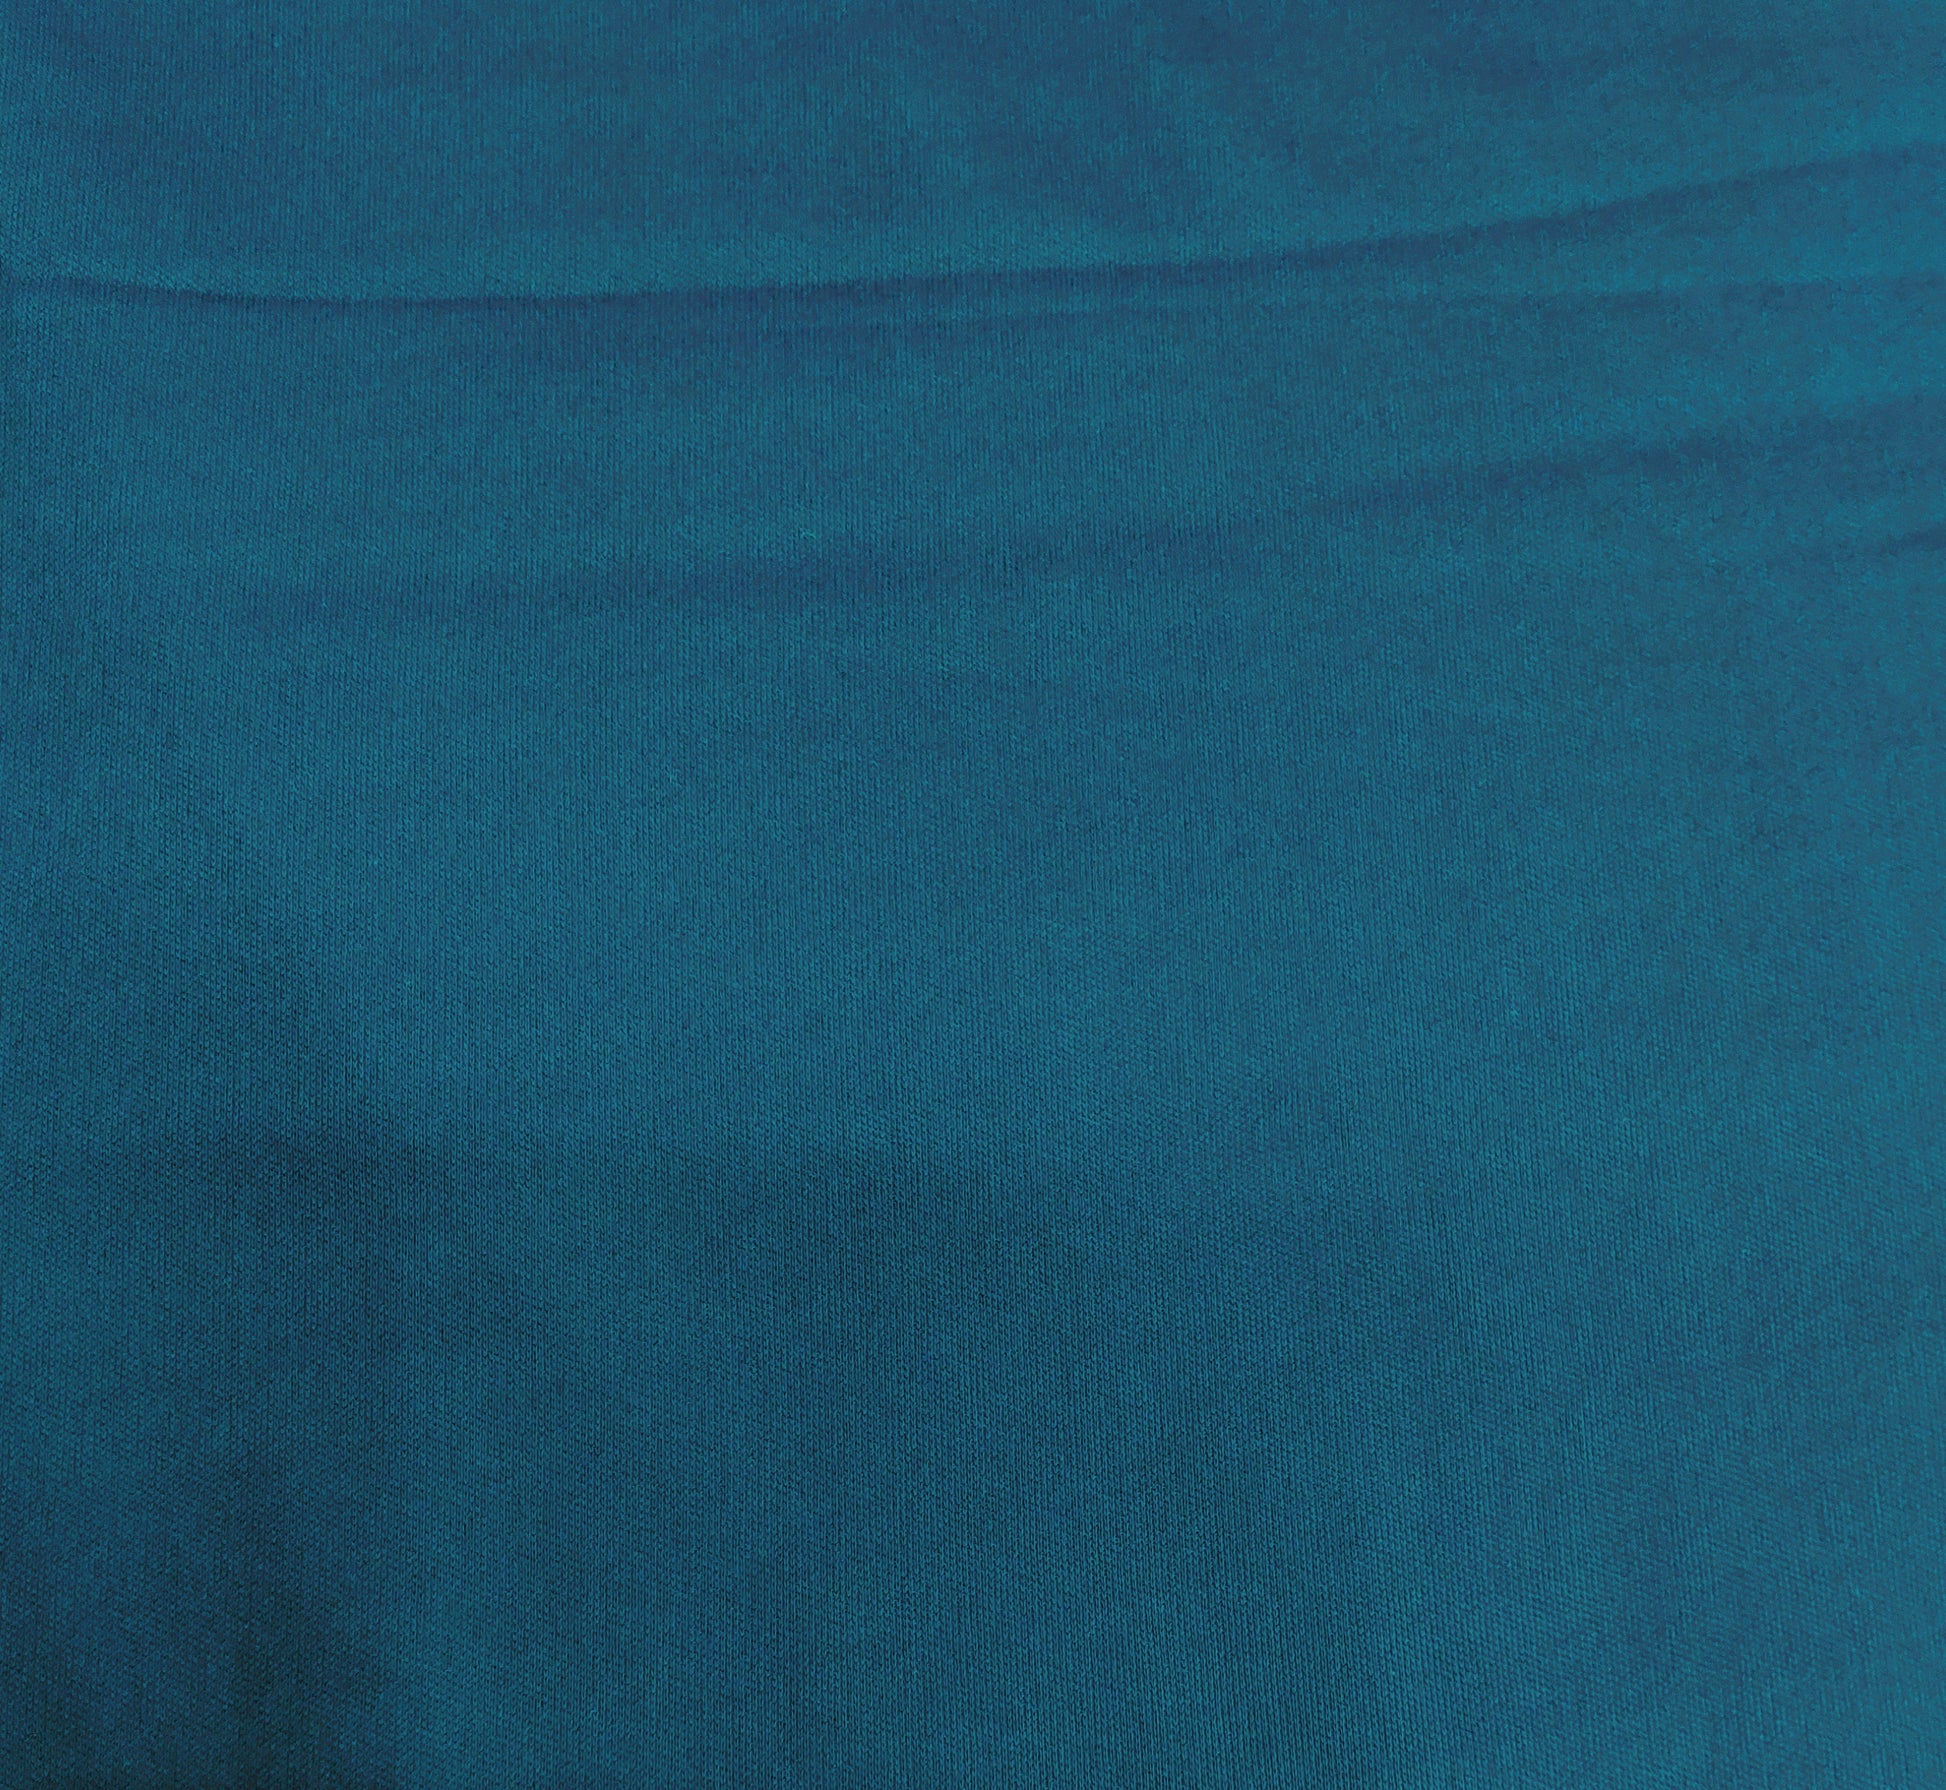 Teal Blue Solid Lycra Fabric